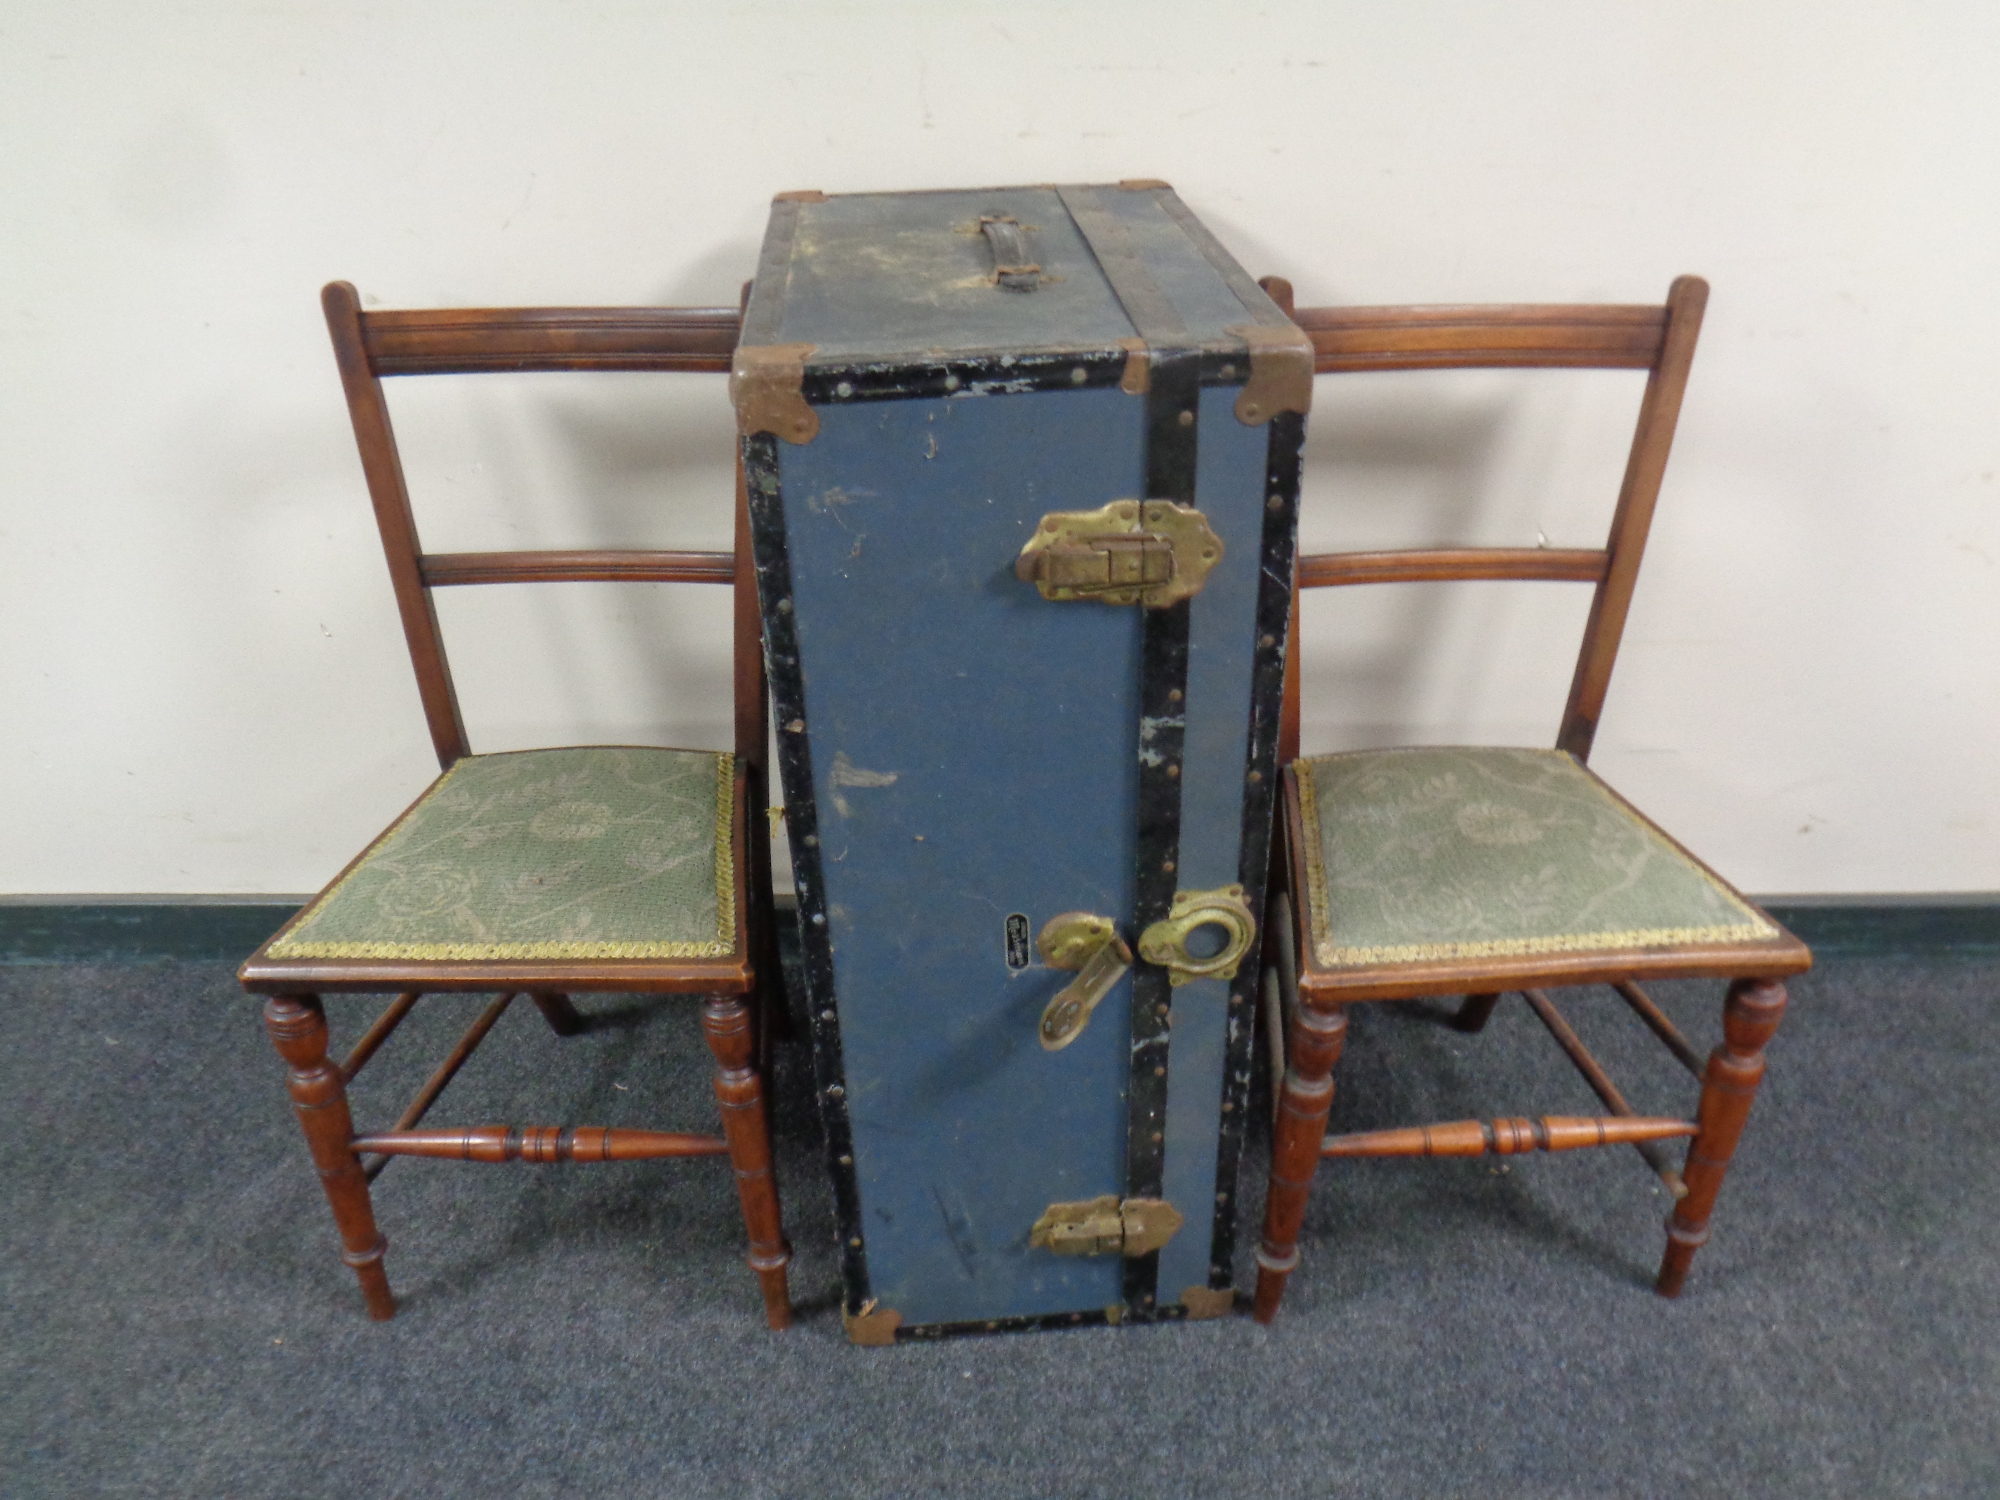 An early 20th century metal bound travelling trunk together with a pair of Edwardian bedroom chairs